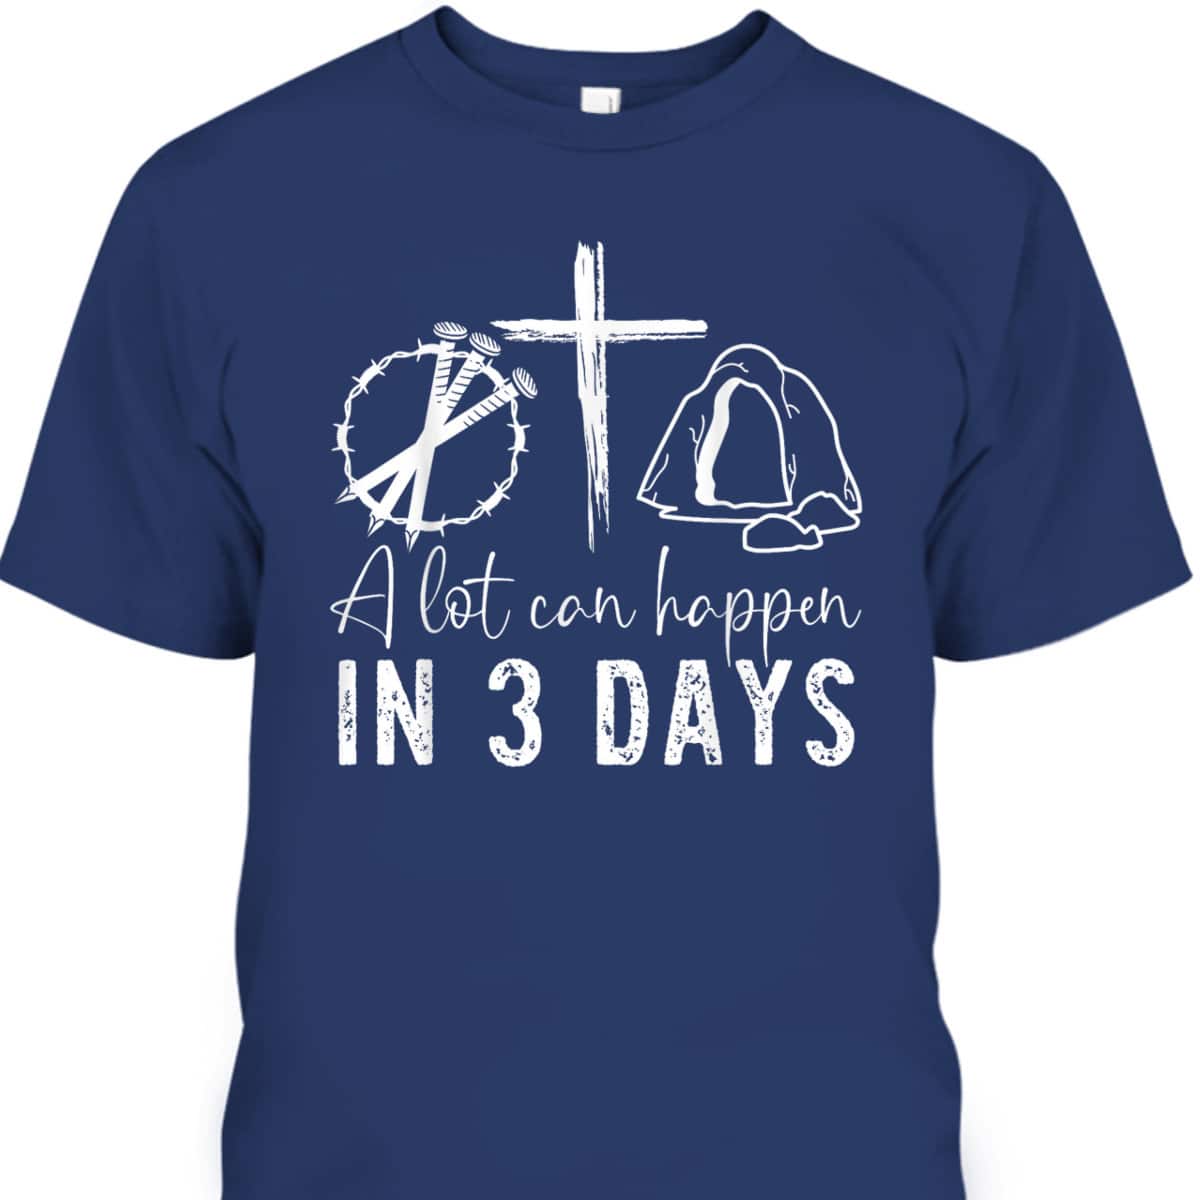 Miraculous 3 Days A Lot Can Happen Jesus Christian Easter Day T-Shirt